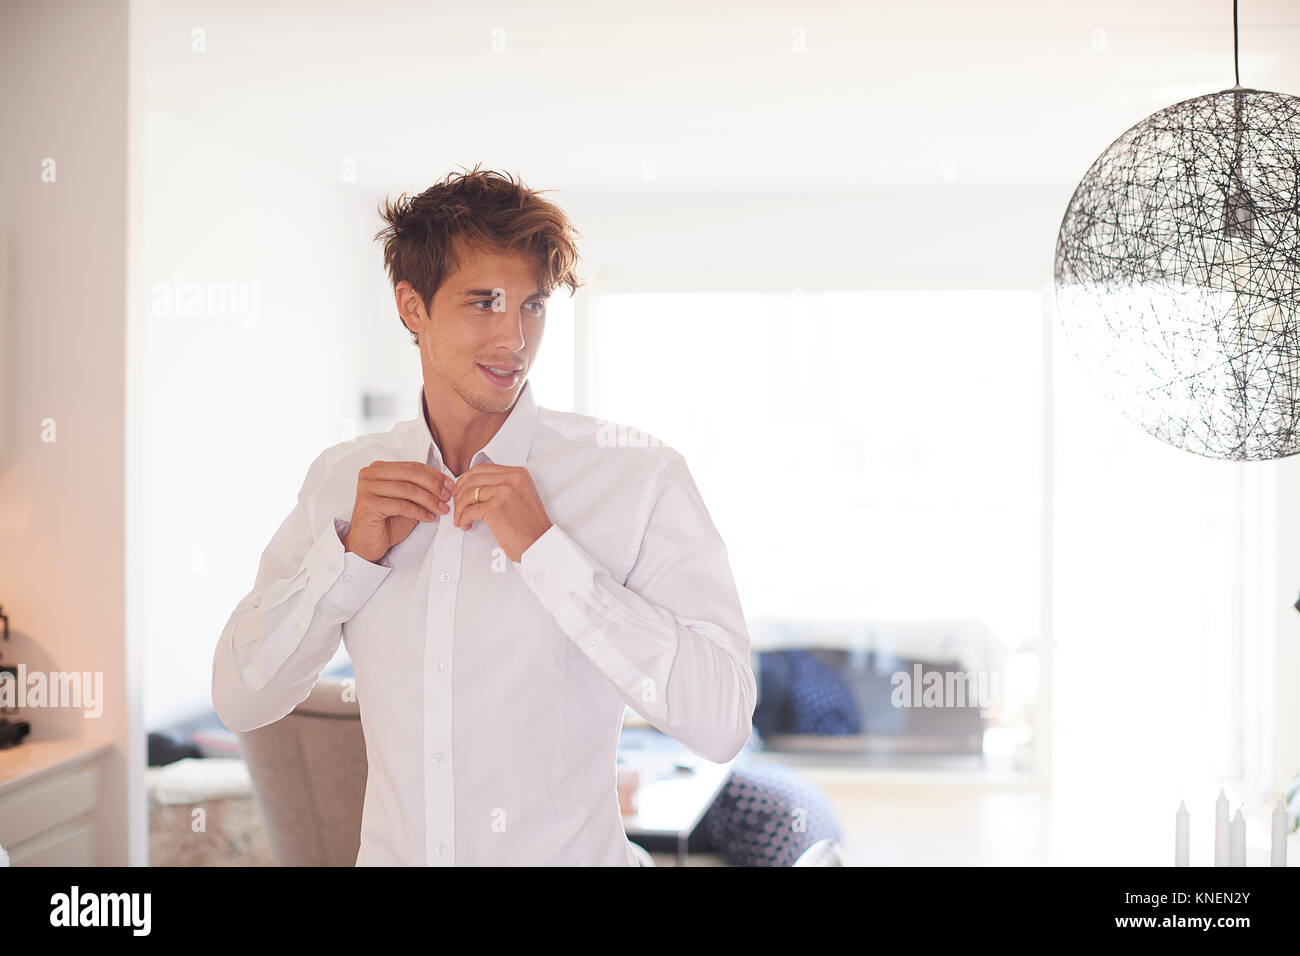 Mid adult man in living room buttoning shirt Stock Photo